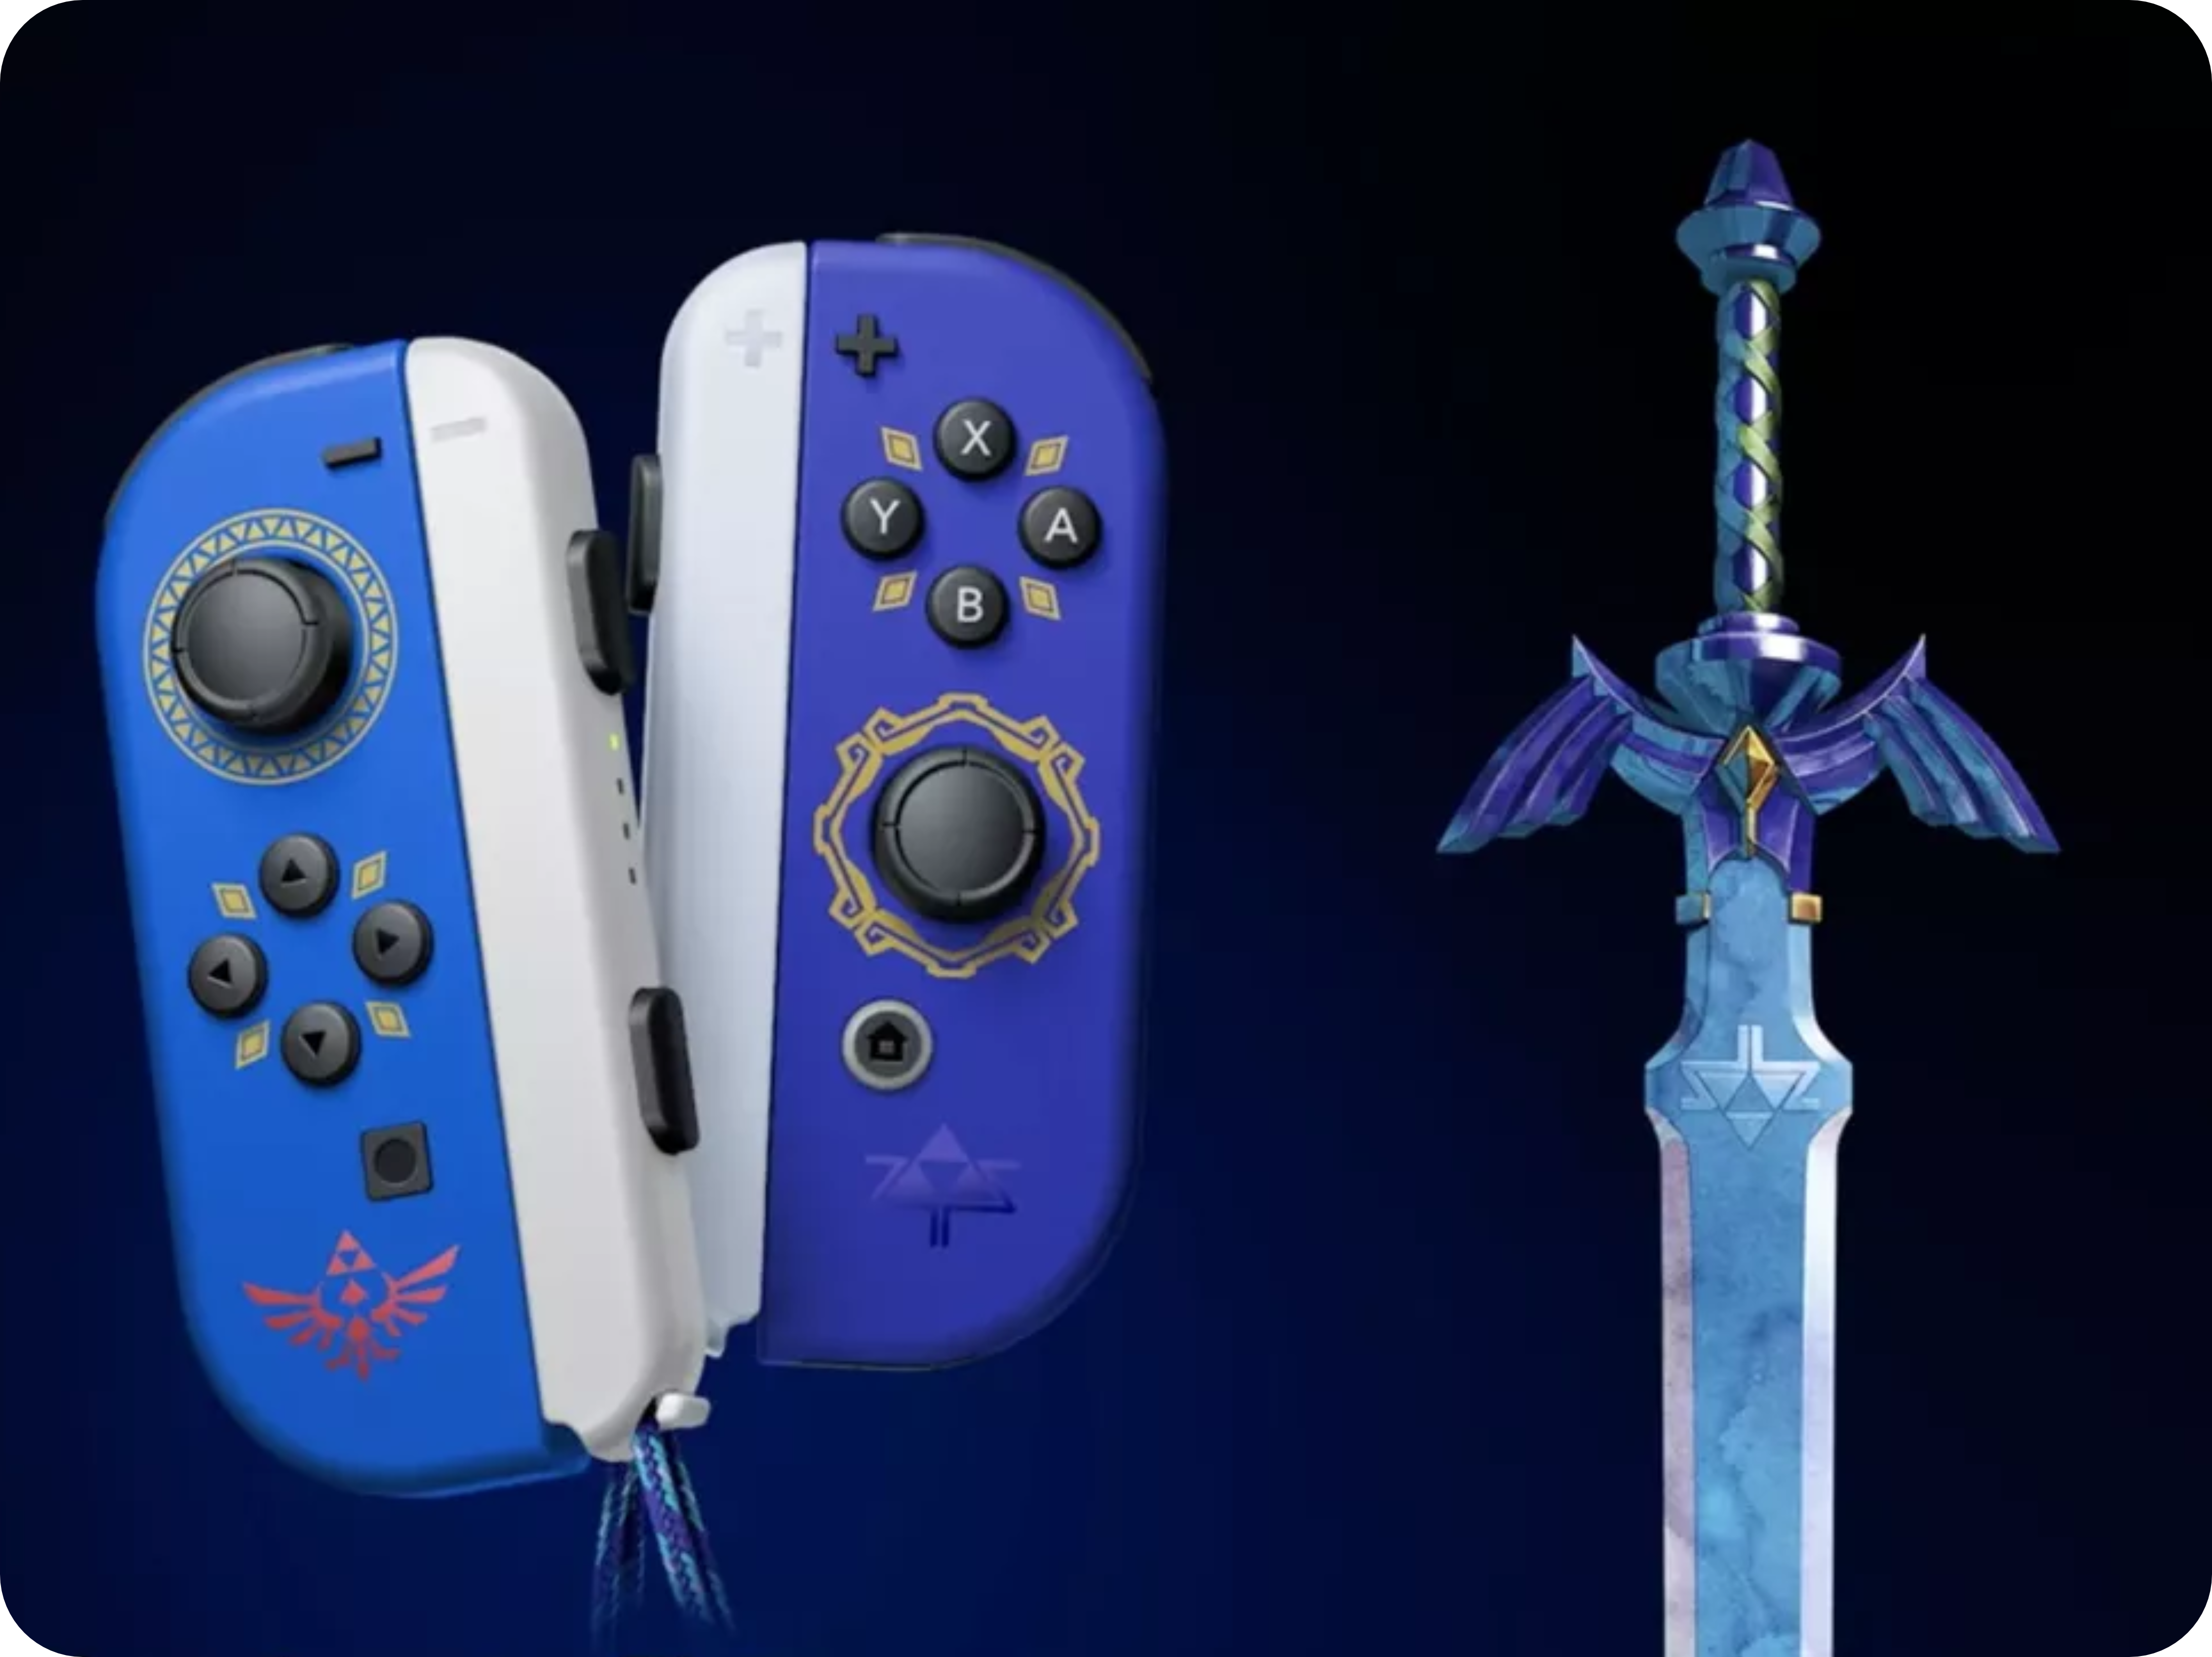 The Legend of Zelda: Skyward Sword is coming for Nintendo Switch with special Joy-Con controllers